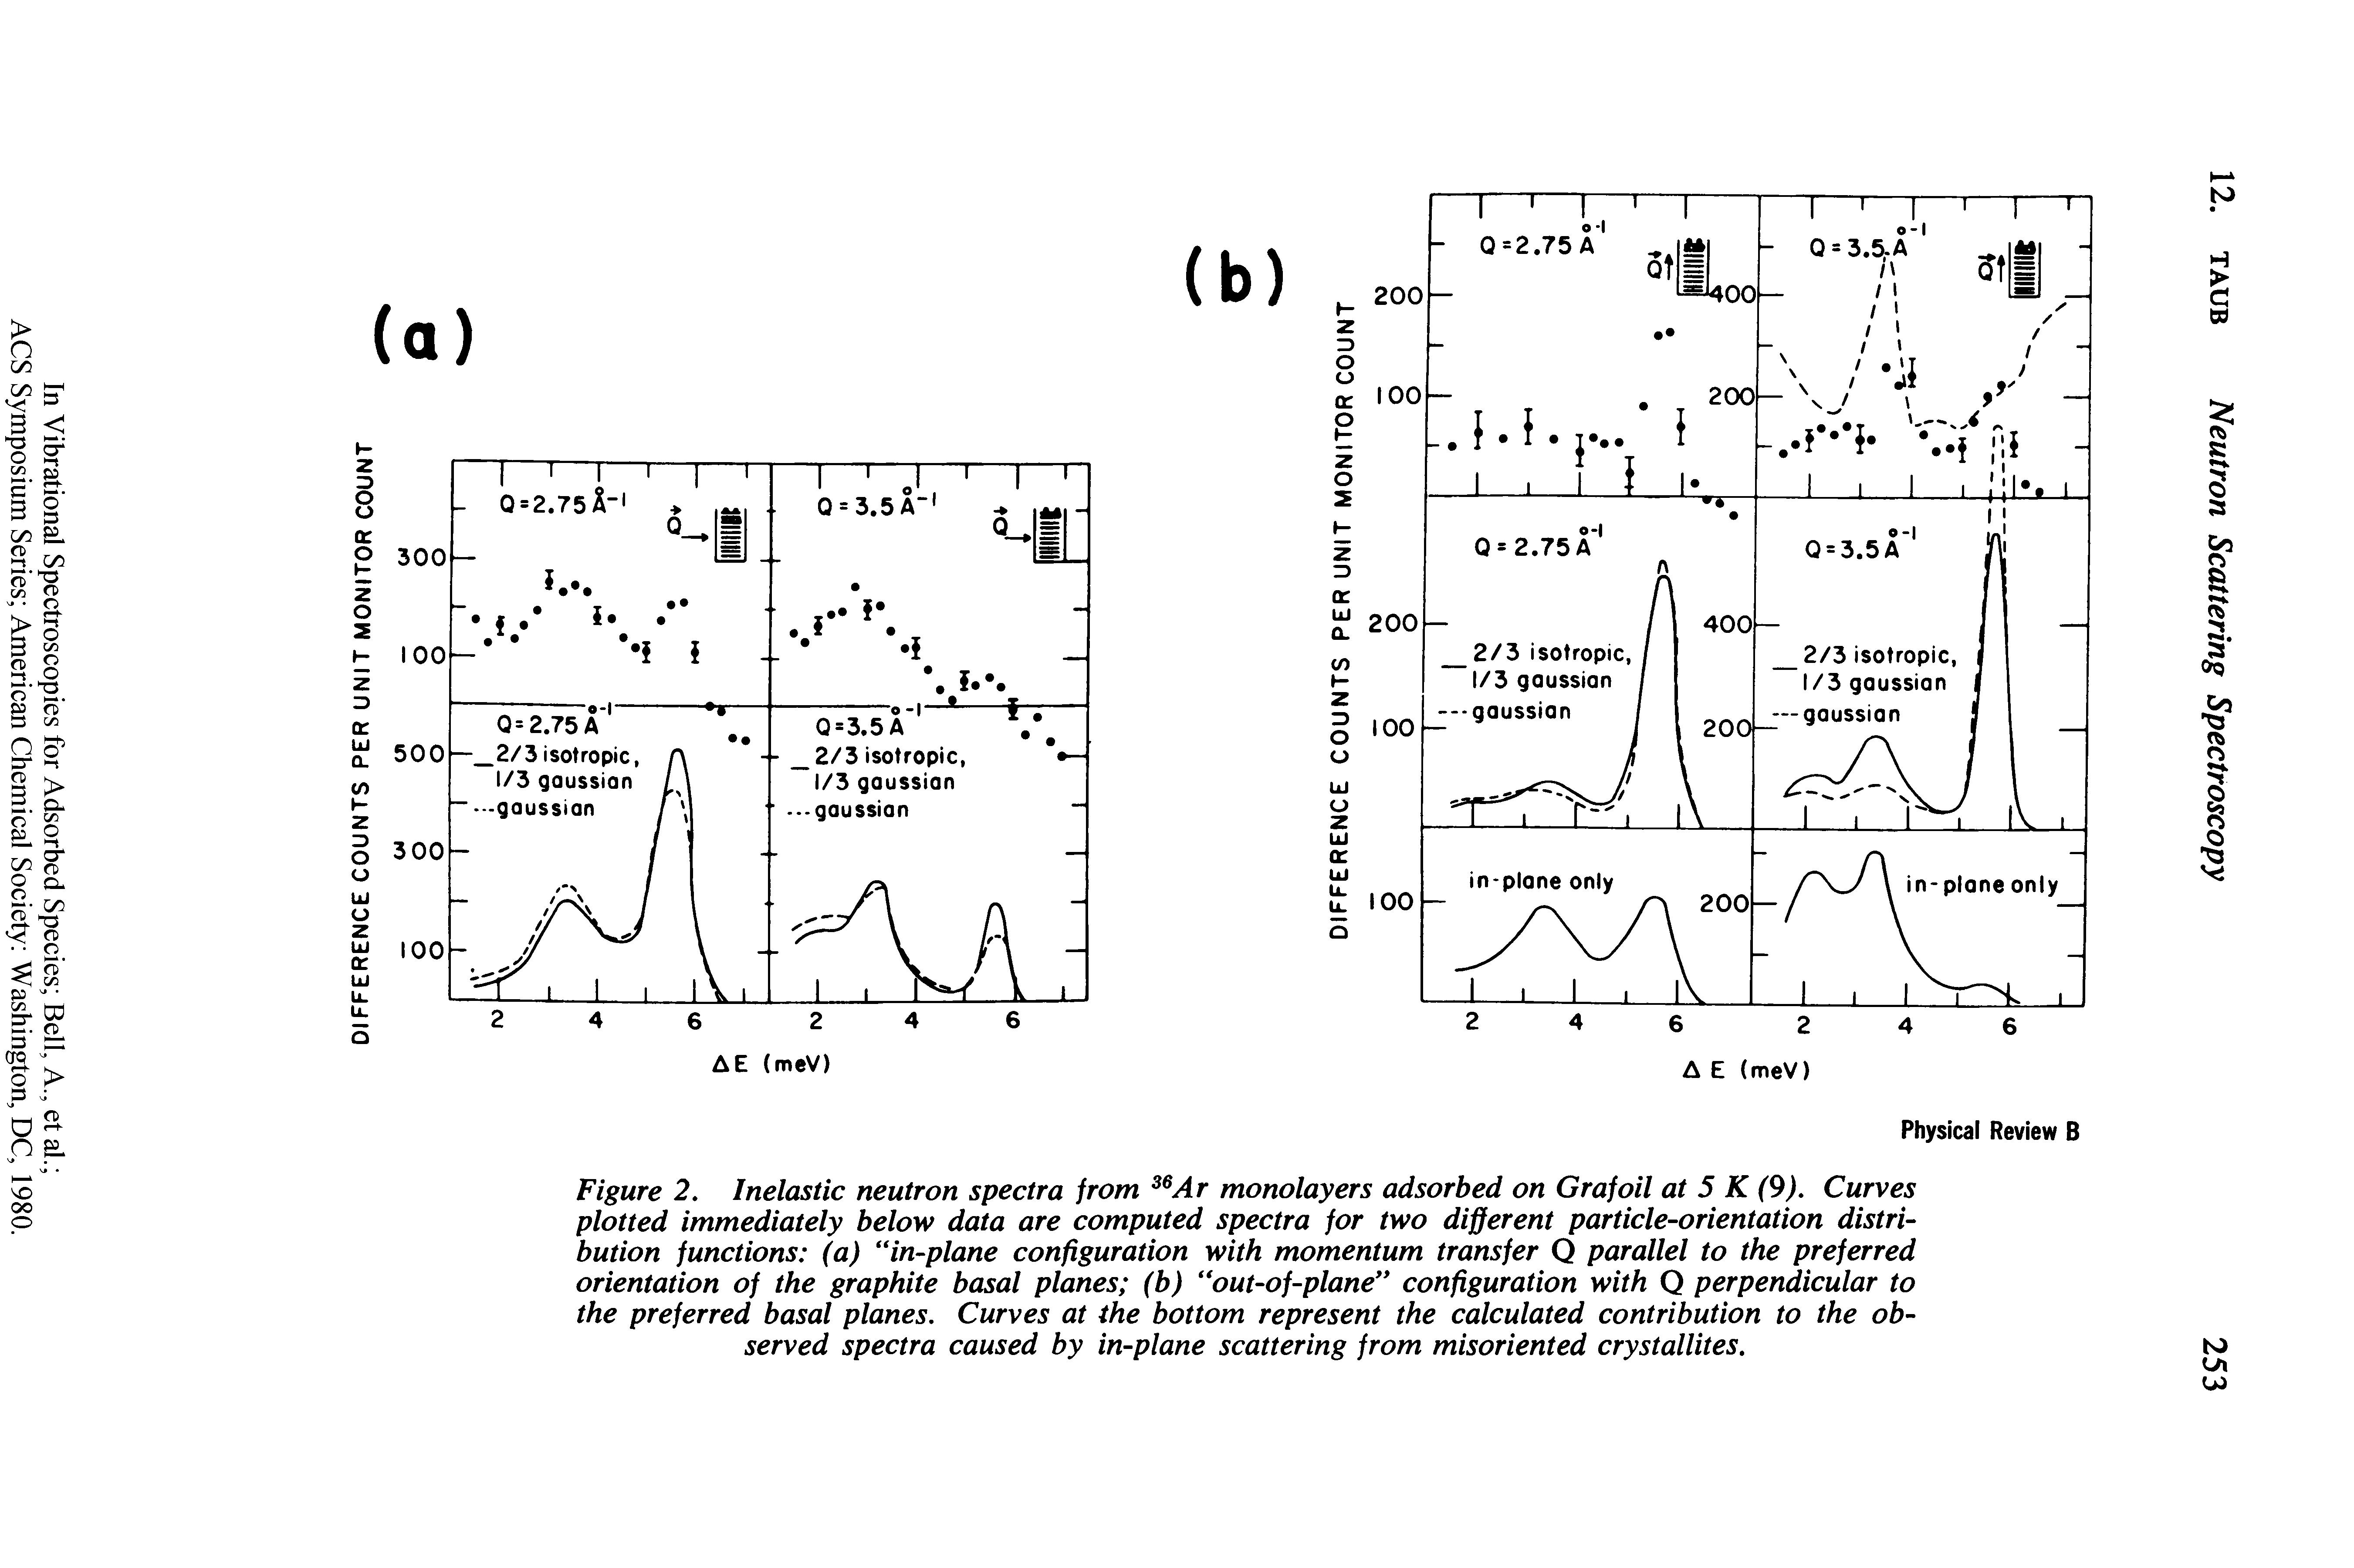 Figure 2. Inelastic neutron spectra from 36Ar monolayers adsorbed on Graf oil at 5 K (9). Curves plotted immediately below data are computed spectra for two different particle-orientation distribution functions (a) in-plane configuration with momentum transfer Q parallel to the preferred orientation of the graphite basal planes (b) out-of-plane configuration with Q perpendicular to the preferred basal planes. Curves at the bottom represent the calculated contribution to the observed spectra caused by in-plane scattering from misoriented crystallites.